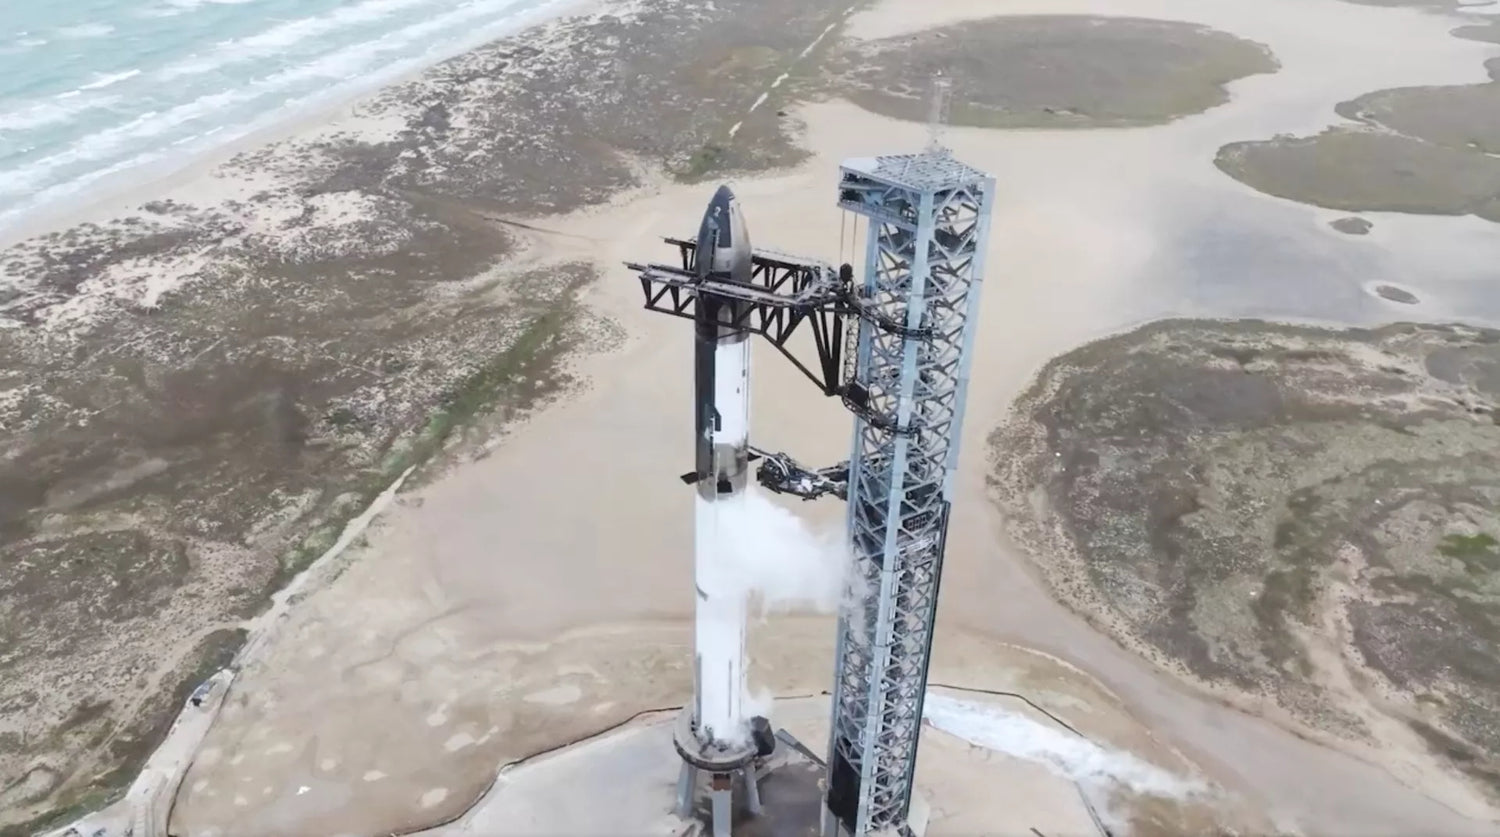 SpaceX is a step closer to launching Starship to orbit after engineers perform a Wet Dress Rehearsal